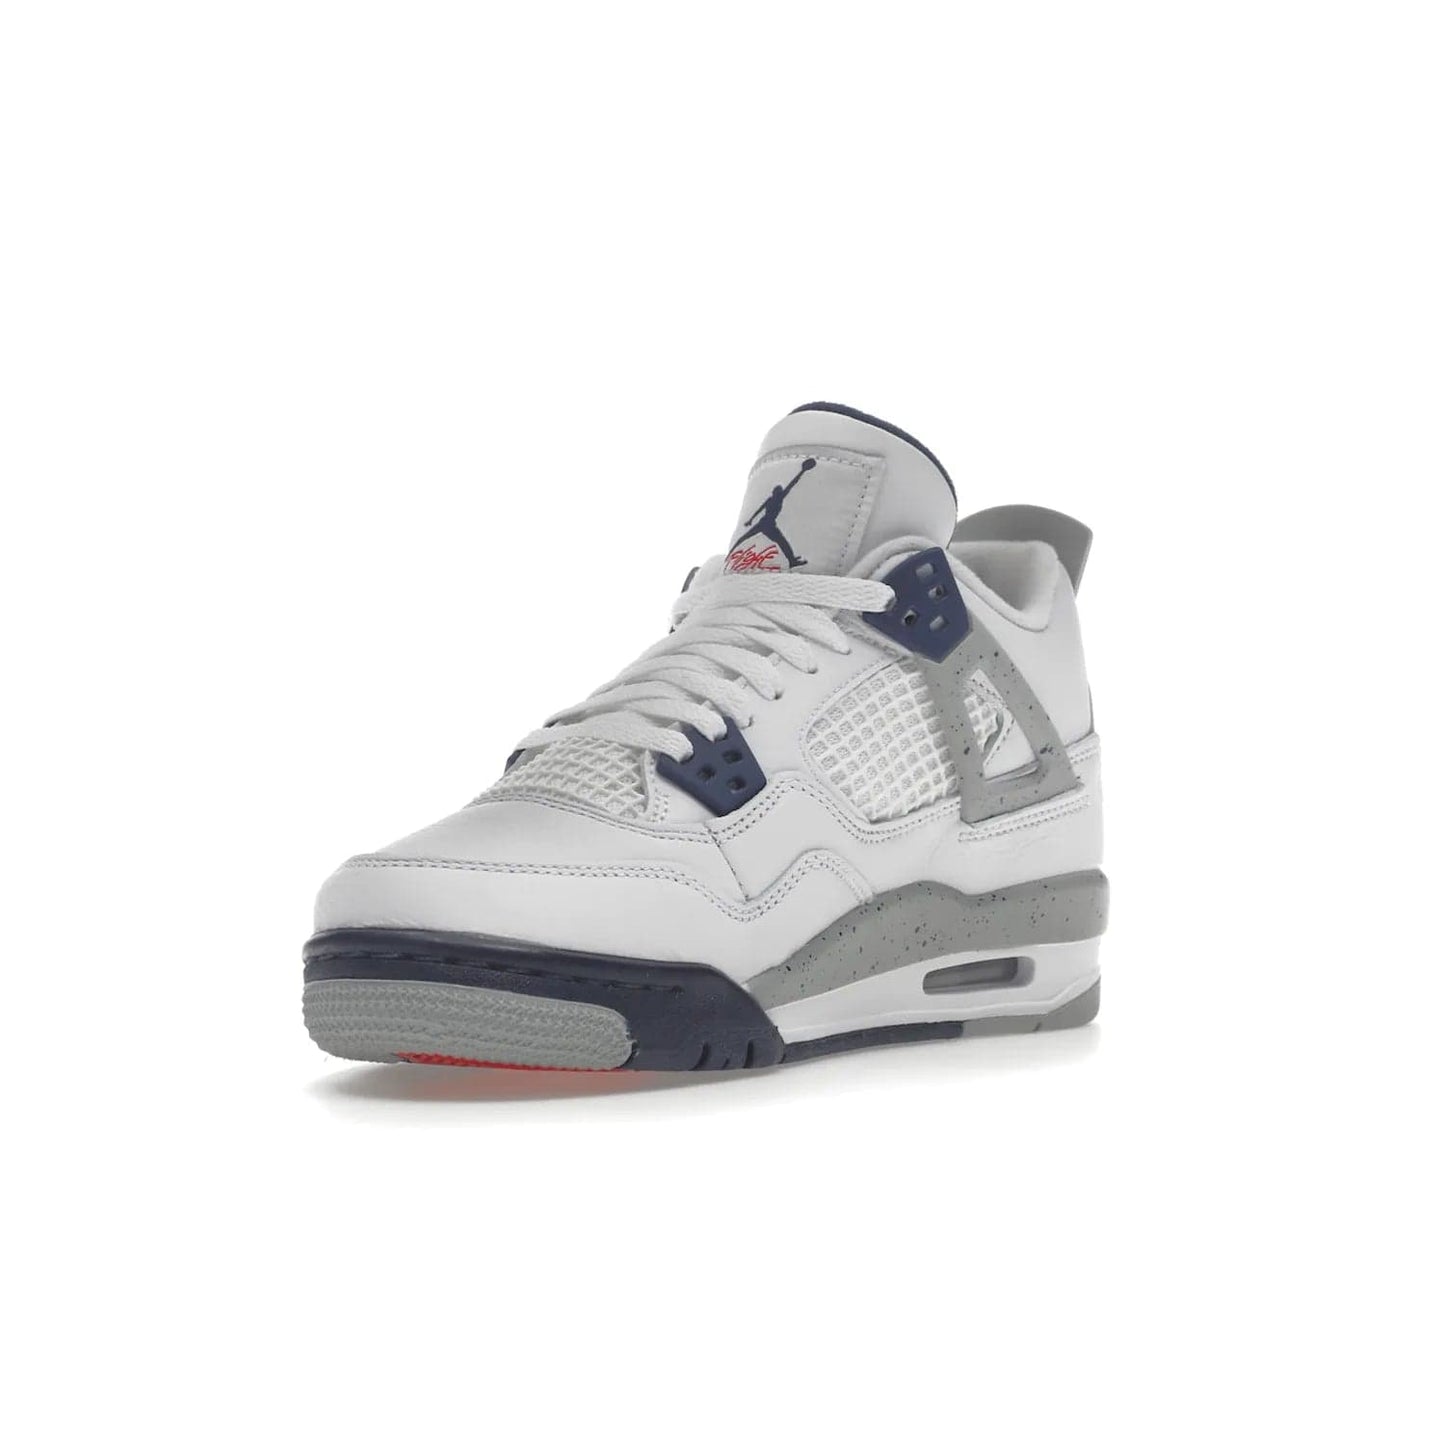 Jordan 4 Retro Midnight Navy (GS) - Image 14 - Only at www.BallersClubKickz.com - Shop the Air Jordan 4 Retro Midnight Navy GS. The white leather upper features black support wings & heel tab, navy eyelets & woven tongue tag with Jumpman logos. The midsole features two-tone polyurethane insole & AIR units in the heel & forefoot. Get the white/midnight navy/light smoke grey/fire colorway & show off your style.